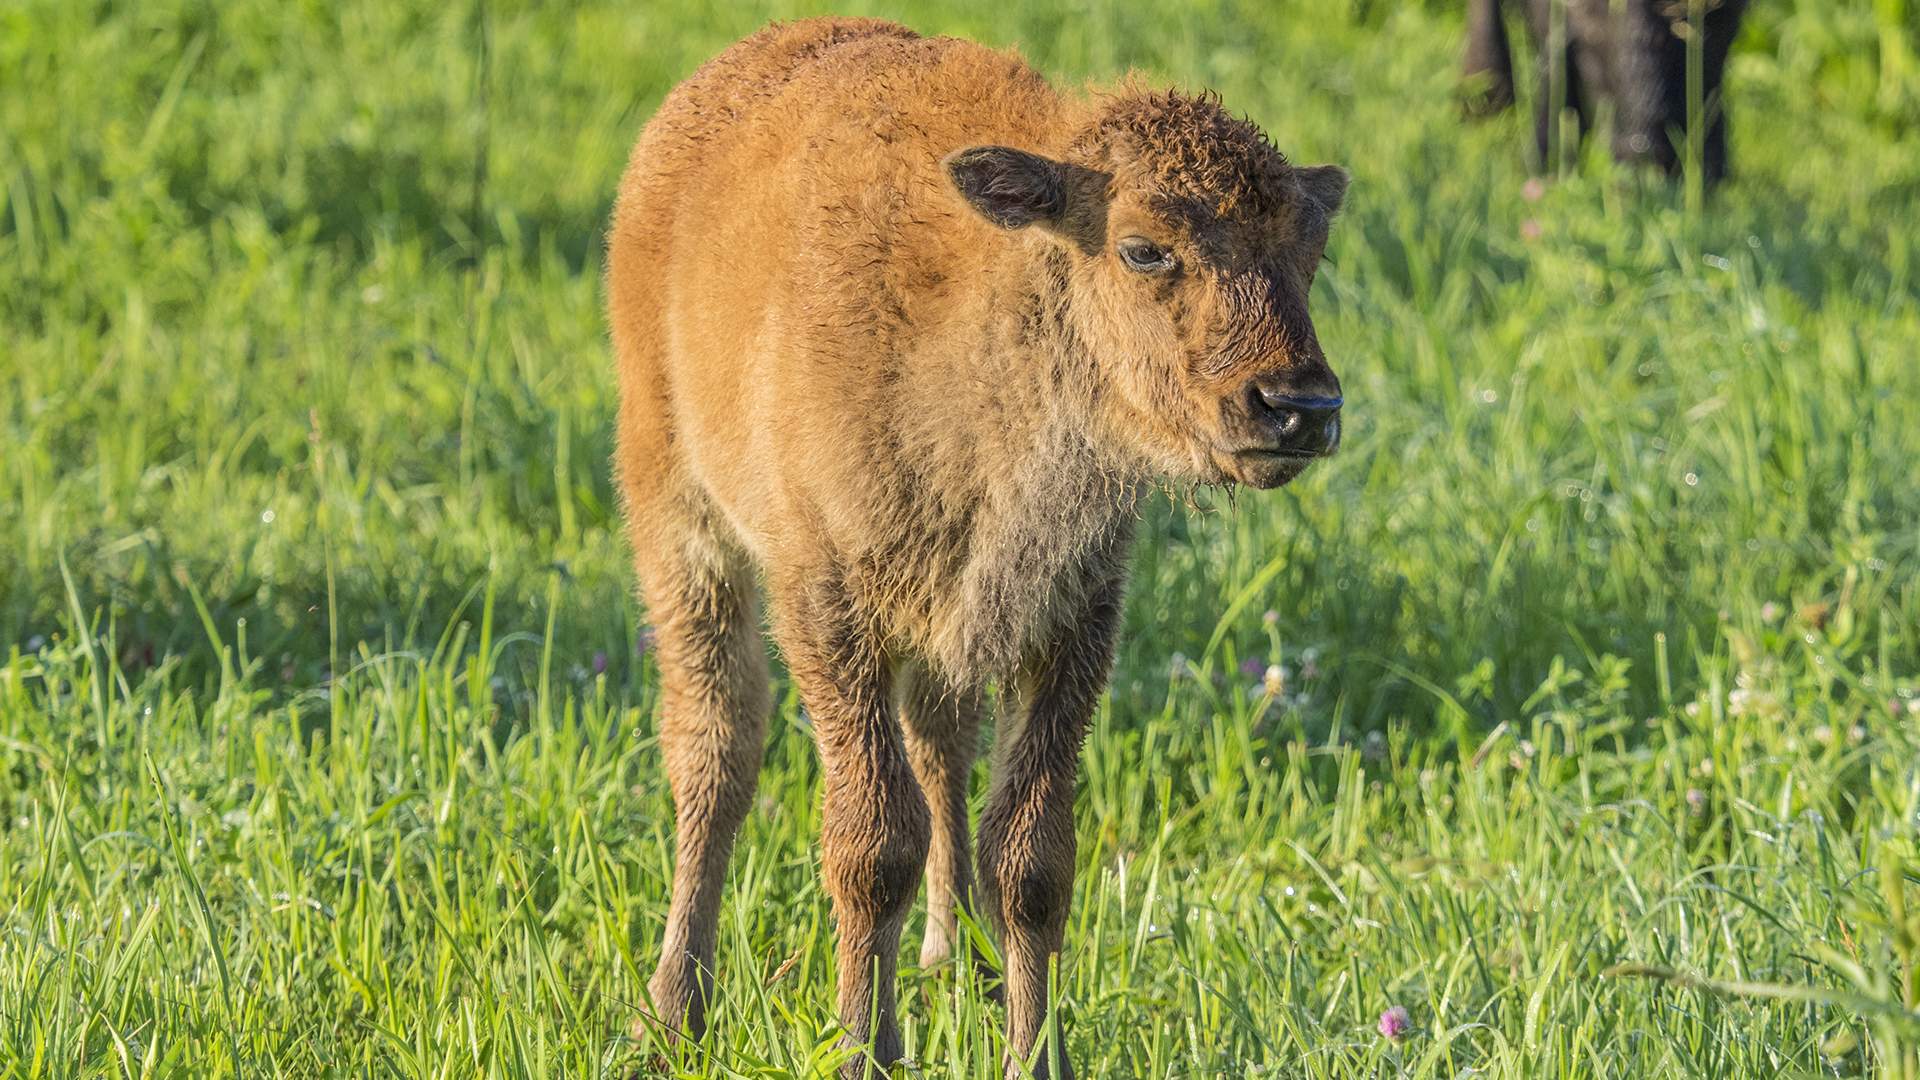 A young bison standing in grasslands